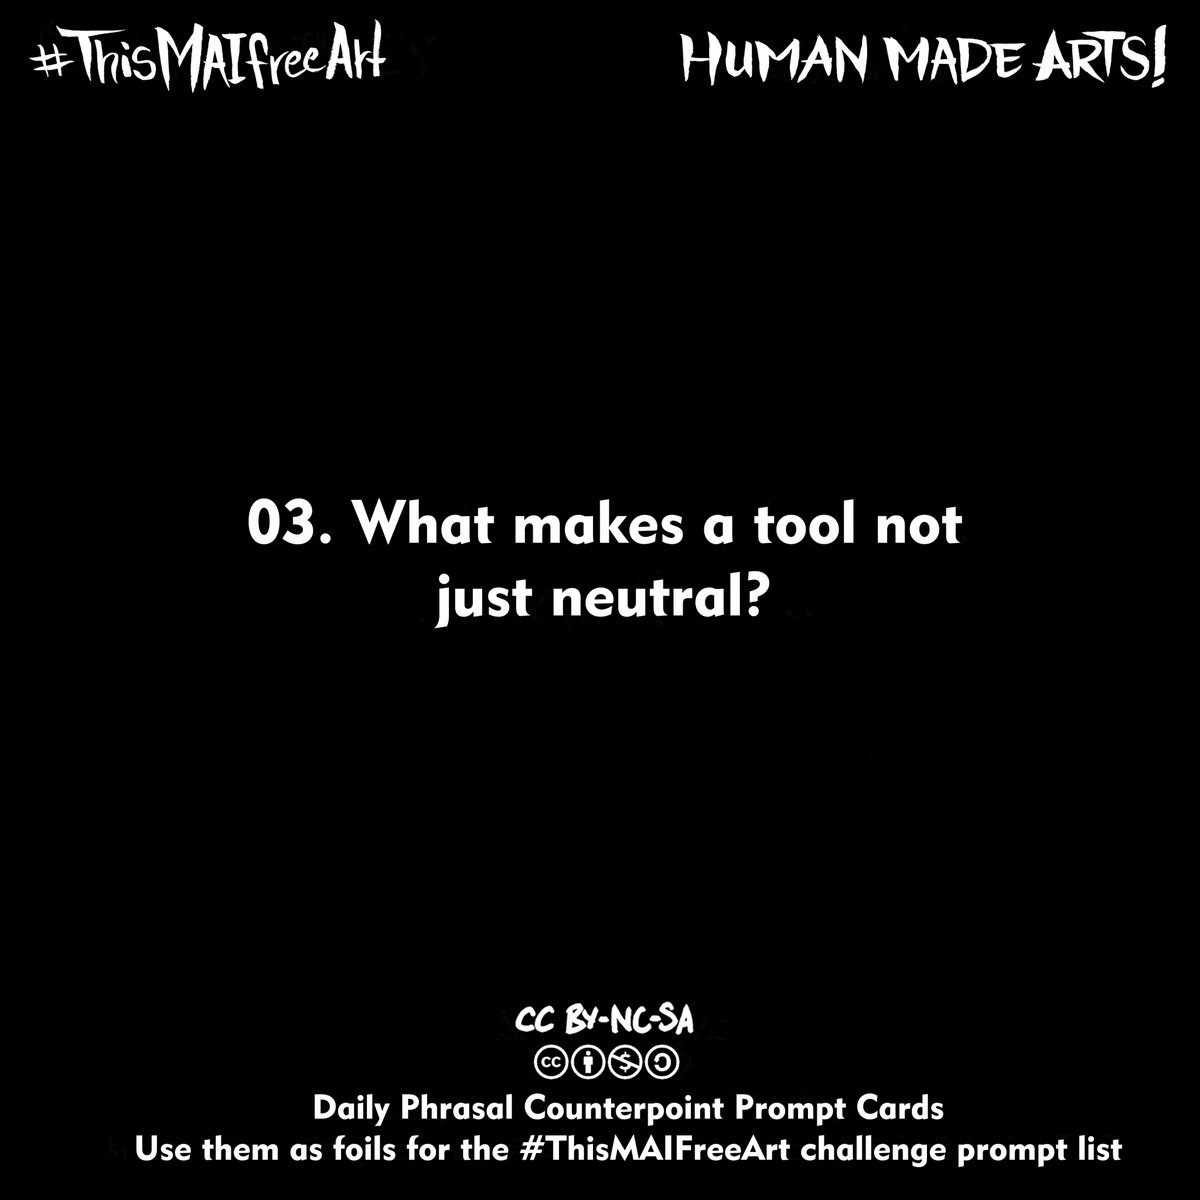 Day 3 of #ThisMAIfreeArt the #HumanMadeArts challenge to talk about AI AND celebrate Human Made Arts! Prompt is 'Show the process' and counter prompt is 'What makes a tool not just neutral?'.
Wrote this out this morning+came upset a page grid so I can draw it up after work. #noai